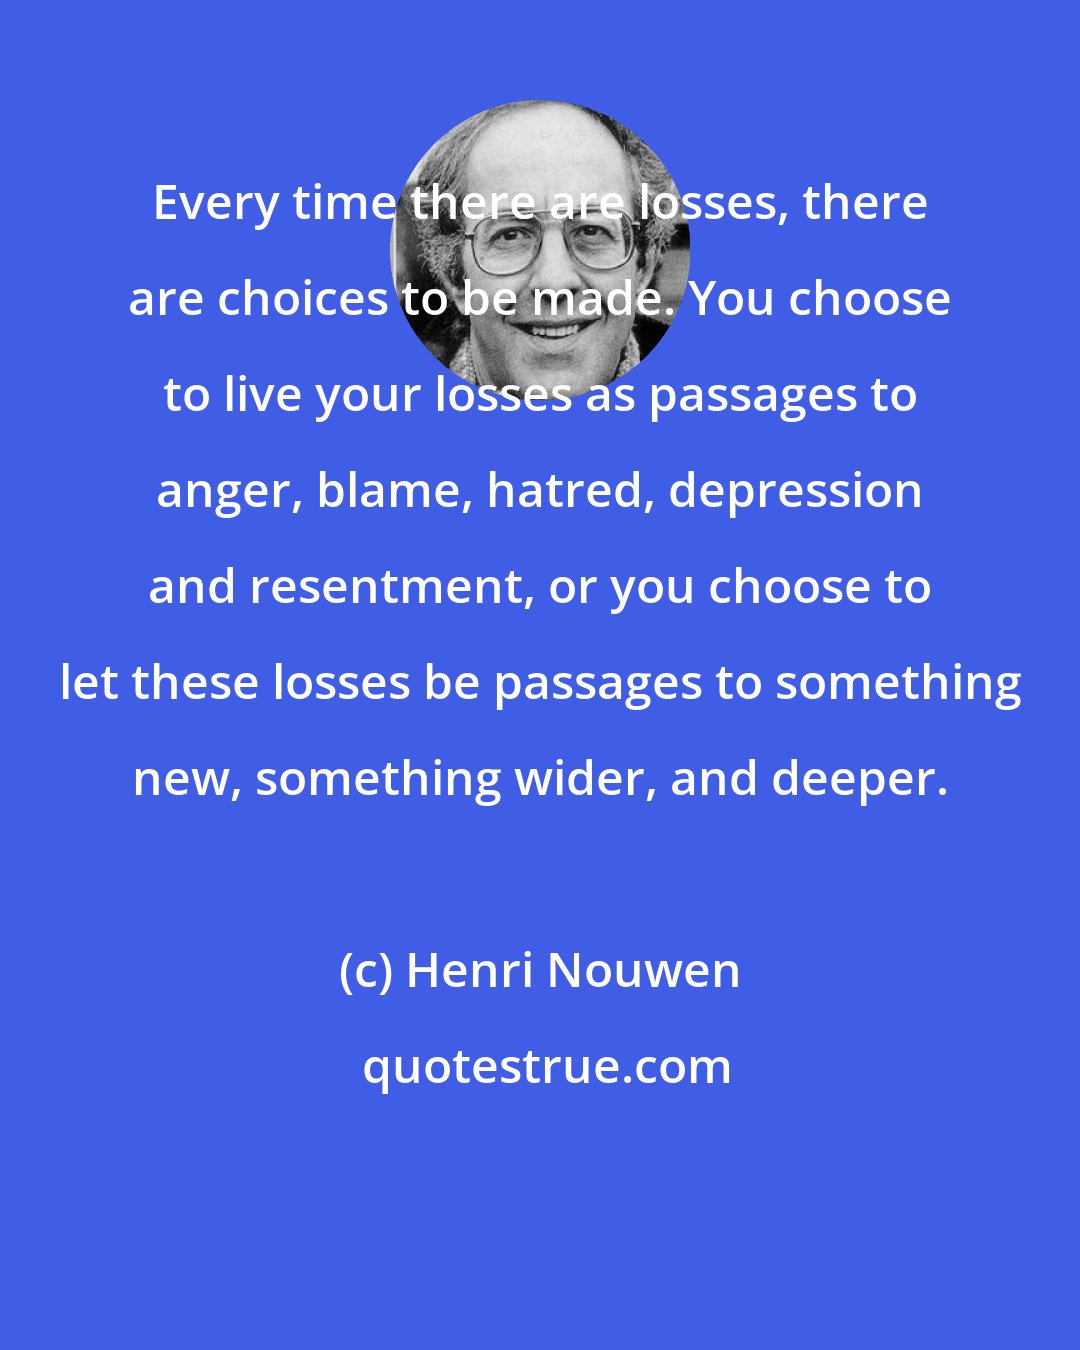 Henri Nouwen: Every time there are losses, there are choices to be made. You choose to live your losses as passages to anger, blame, hatred, depression and resentment, or you choose to let these losses be passages to something new, something wider, and deeper.